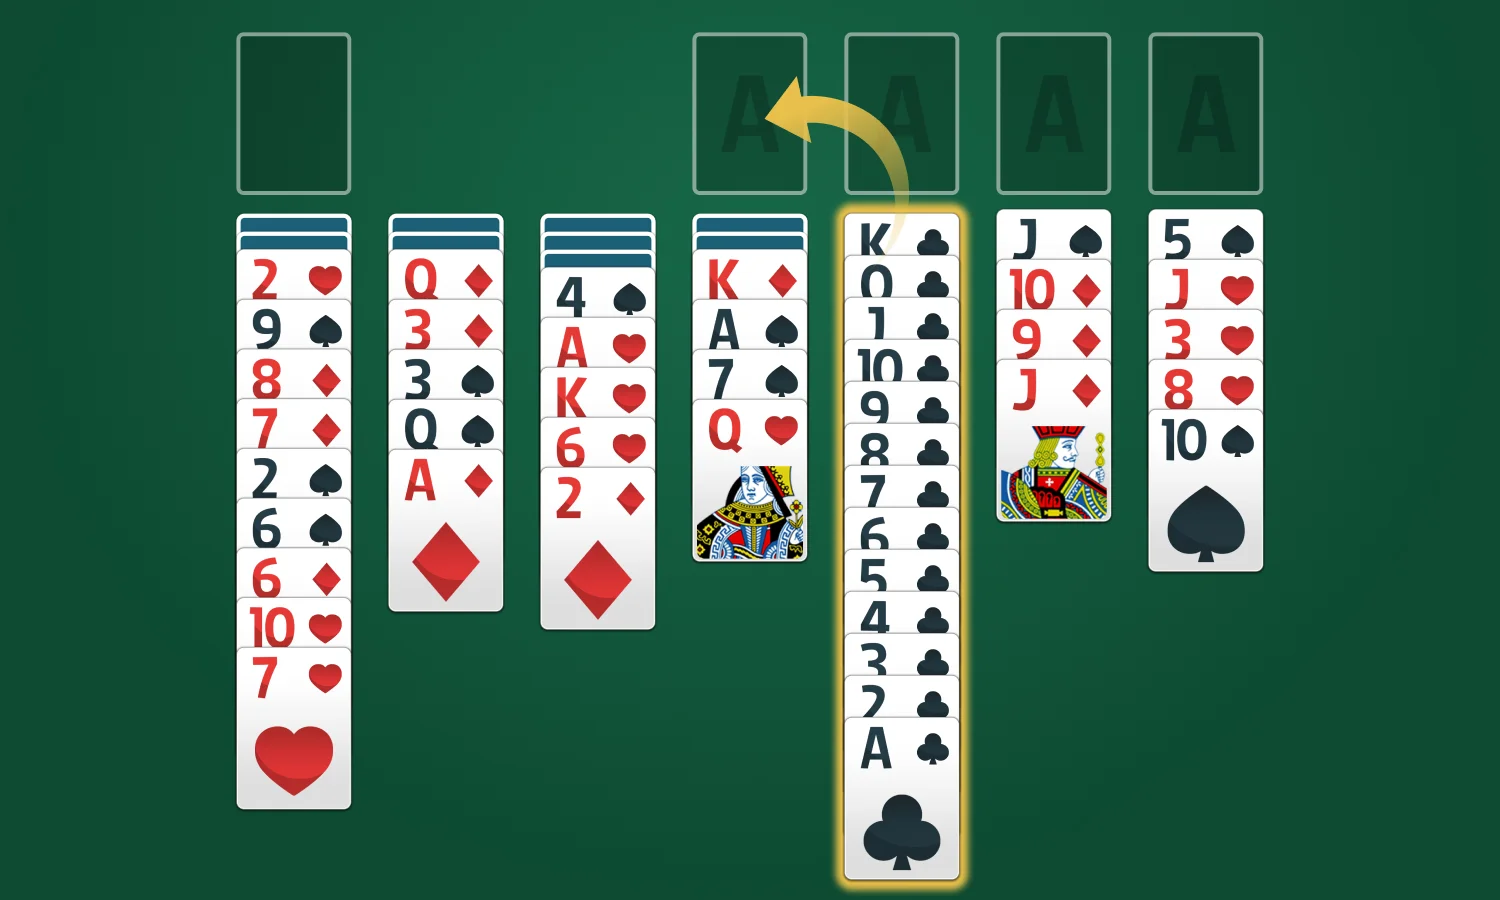 How to Play Scorpion Solitaire: Step 3